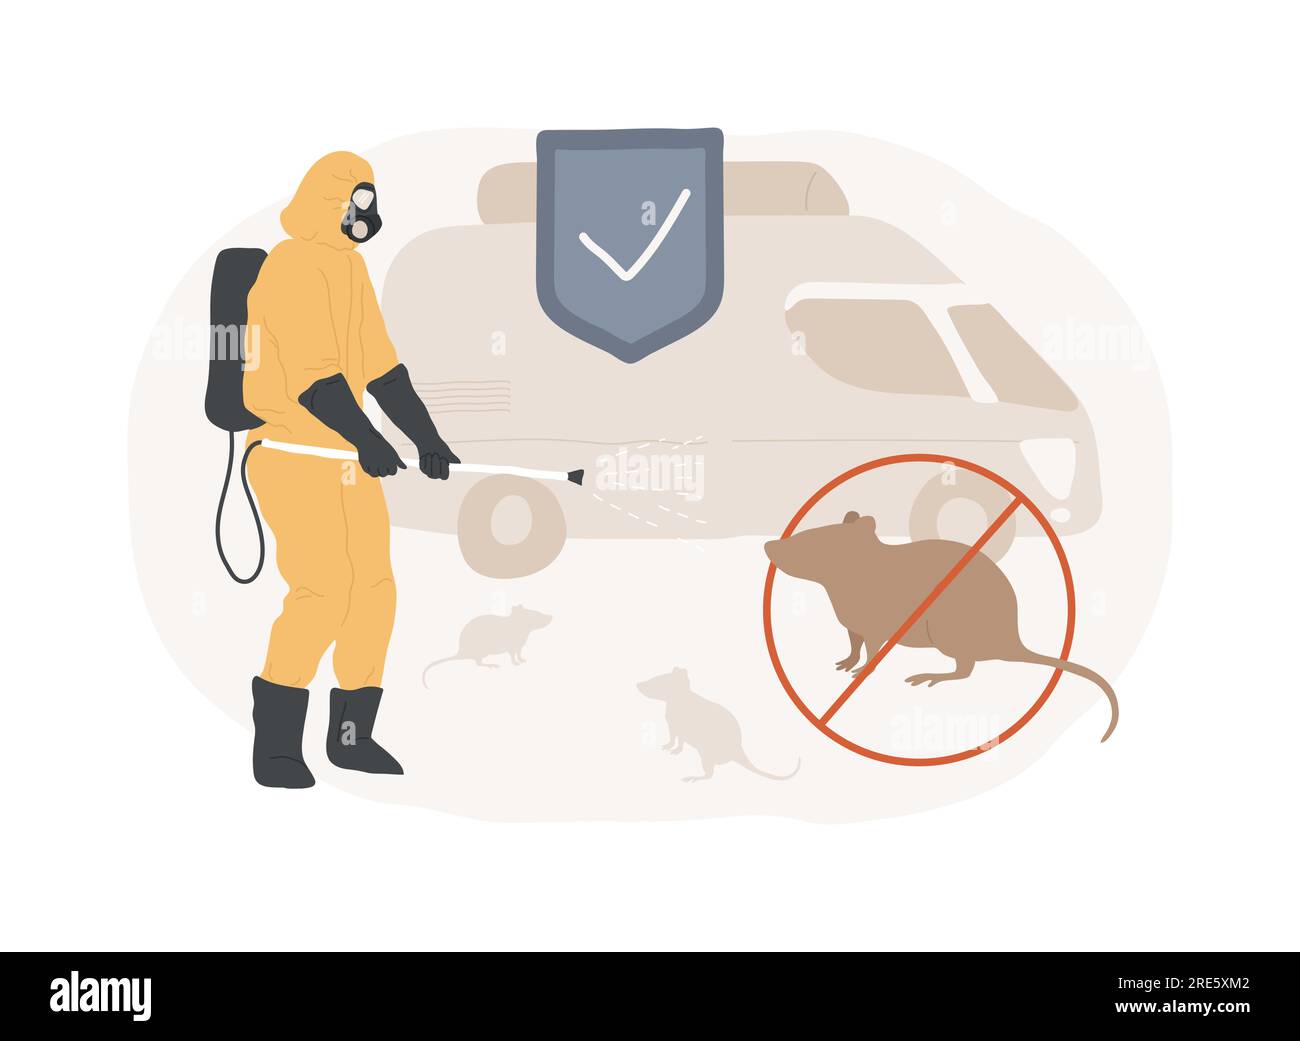 Rodents pest control service isolated concept vector illustration. Rodent control service, house proofing, rats trapping program, mice exterminator, 24 hour pest removal vector concept. Stock Vector